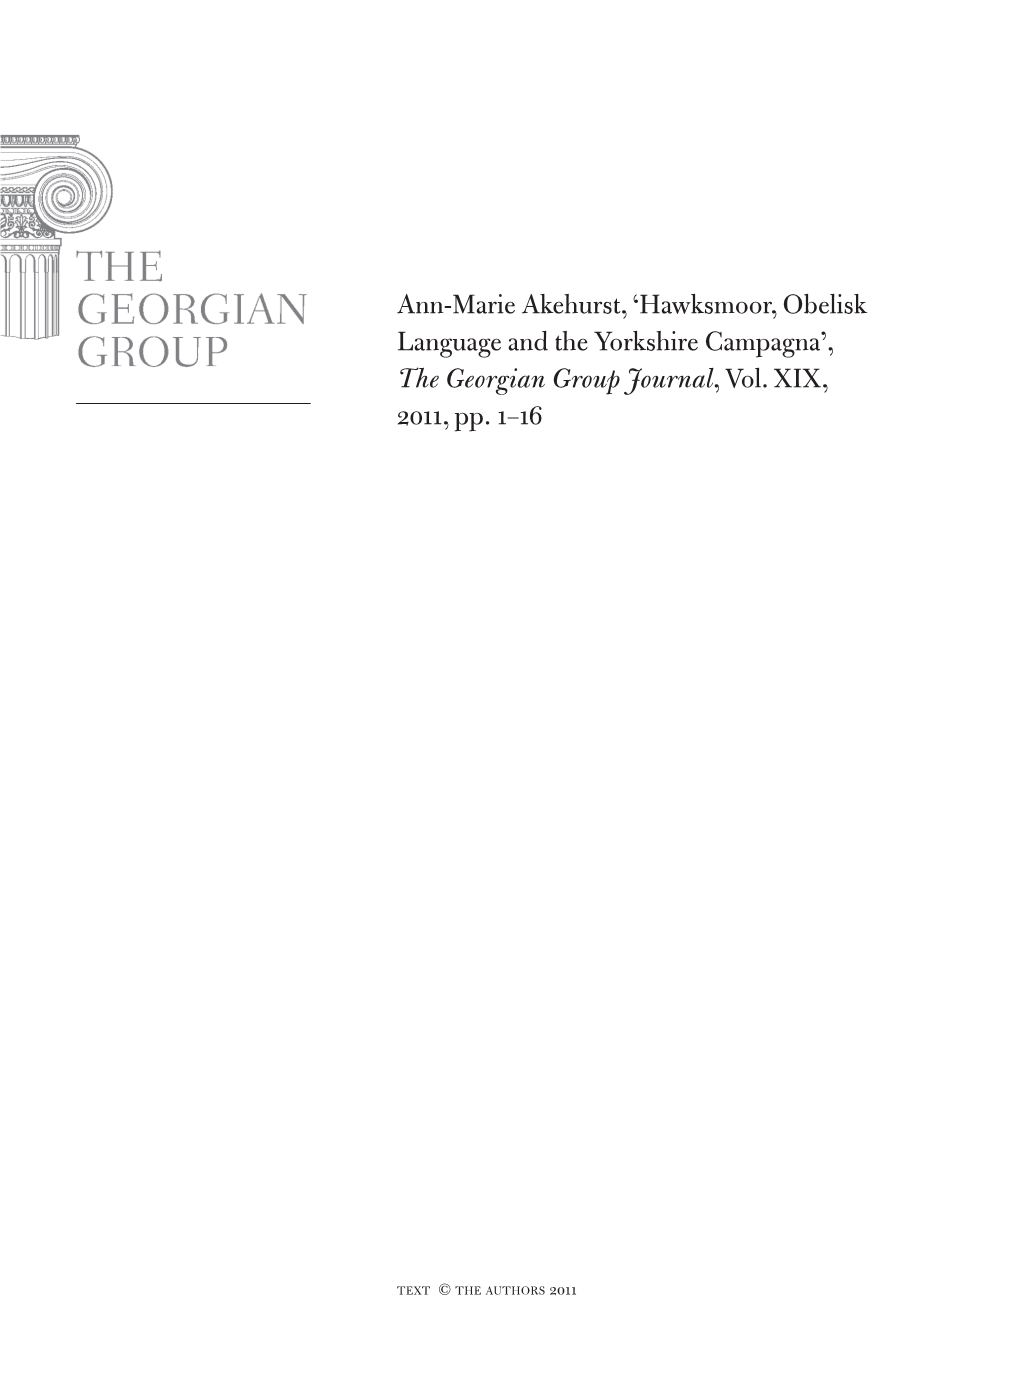 Hawksmoor, Obelisk Language and the Yorkshire Campagna’, the Georgian Group Journal, Vol